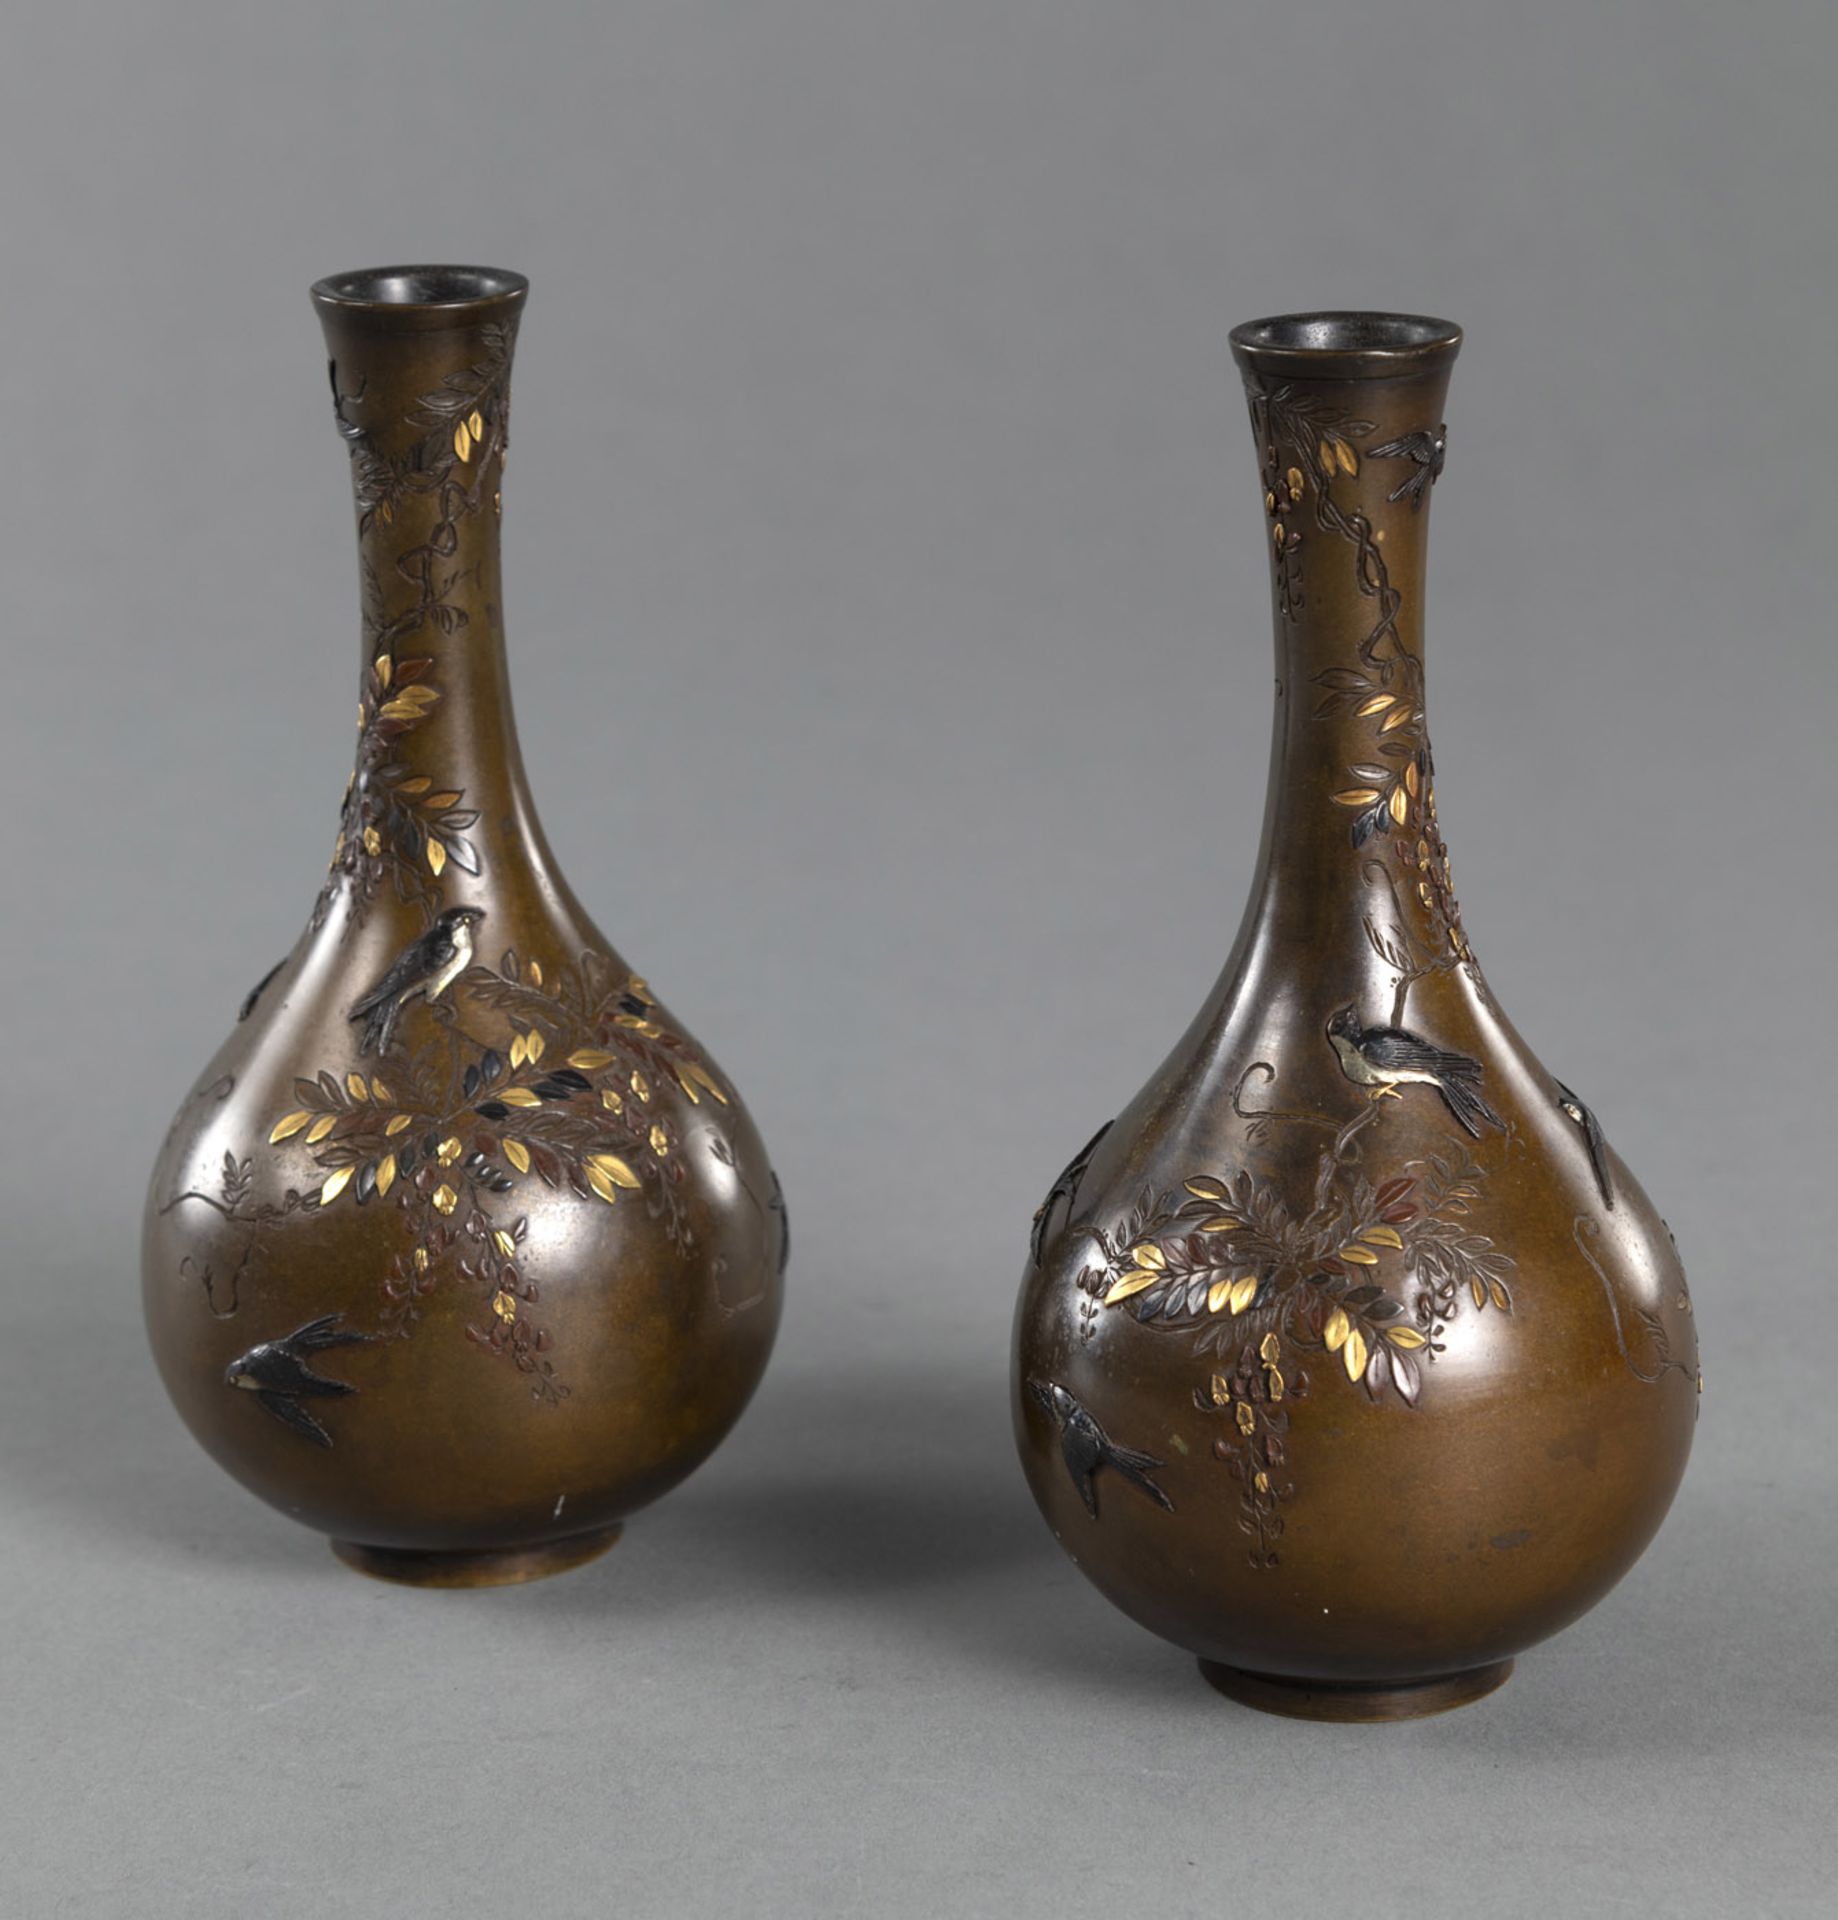 A PAIR OF GOLD- AND SILVER-INLAID WISTERIA AND MAGPIE BRONZE VASES